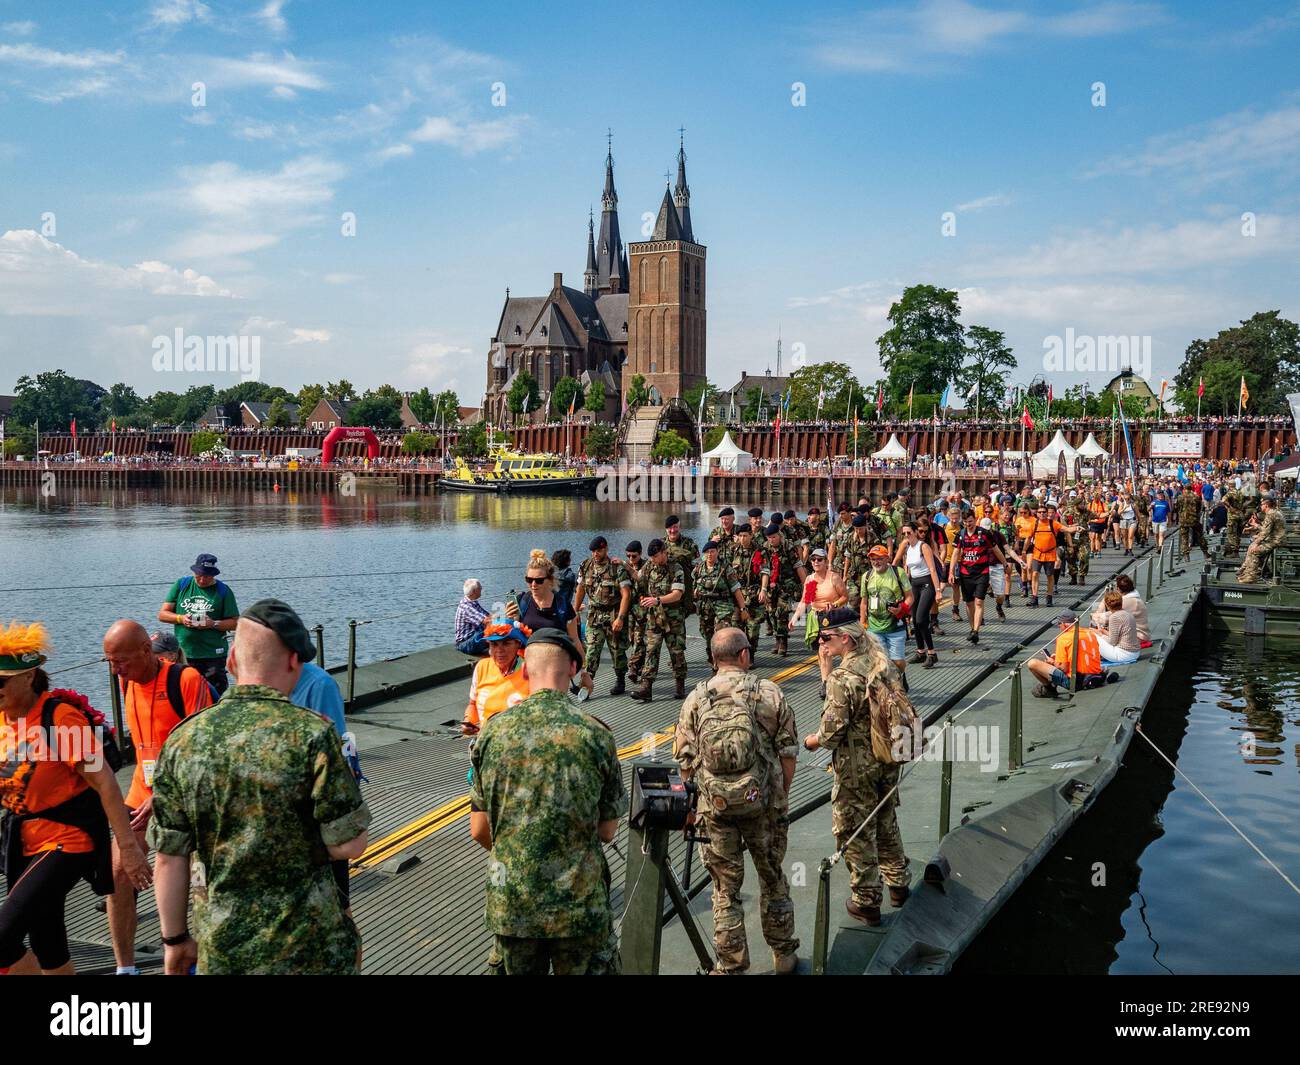 July 21, 2023, Cuijk, Netherlands: Walkers are seen crossing the ''Pontoon Bridge'', a bridge that each year is created for this event. Since it is the worldâ€™s biggest multi-day walking event, The International Four Days Marches (in Dutch 'De Vierdaagse') is seen as the prime example of sportsmanship and international bonding between military servicemen, women and civilians from many different countries. This year, it was the 105 edition and the official amount of walkers registered was 43,363 from 77 countries. Participants can choose to walk 30km, 40km, or 50km per day. On the last day, 39 Stock Photo